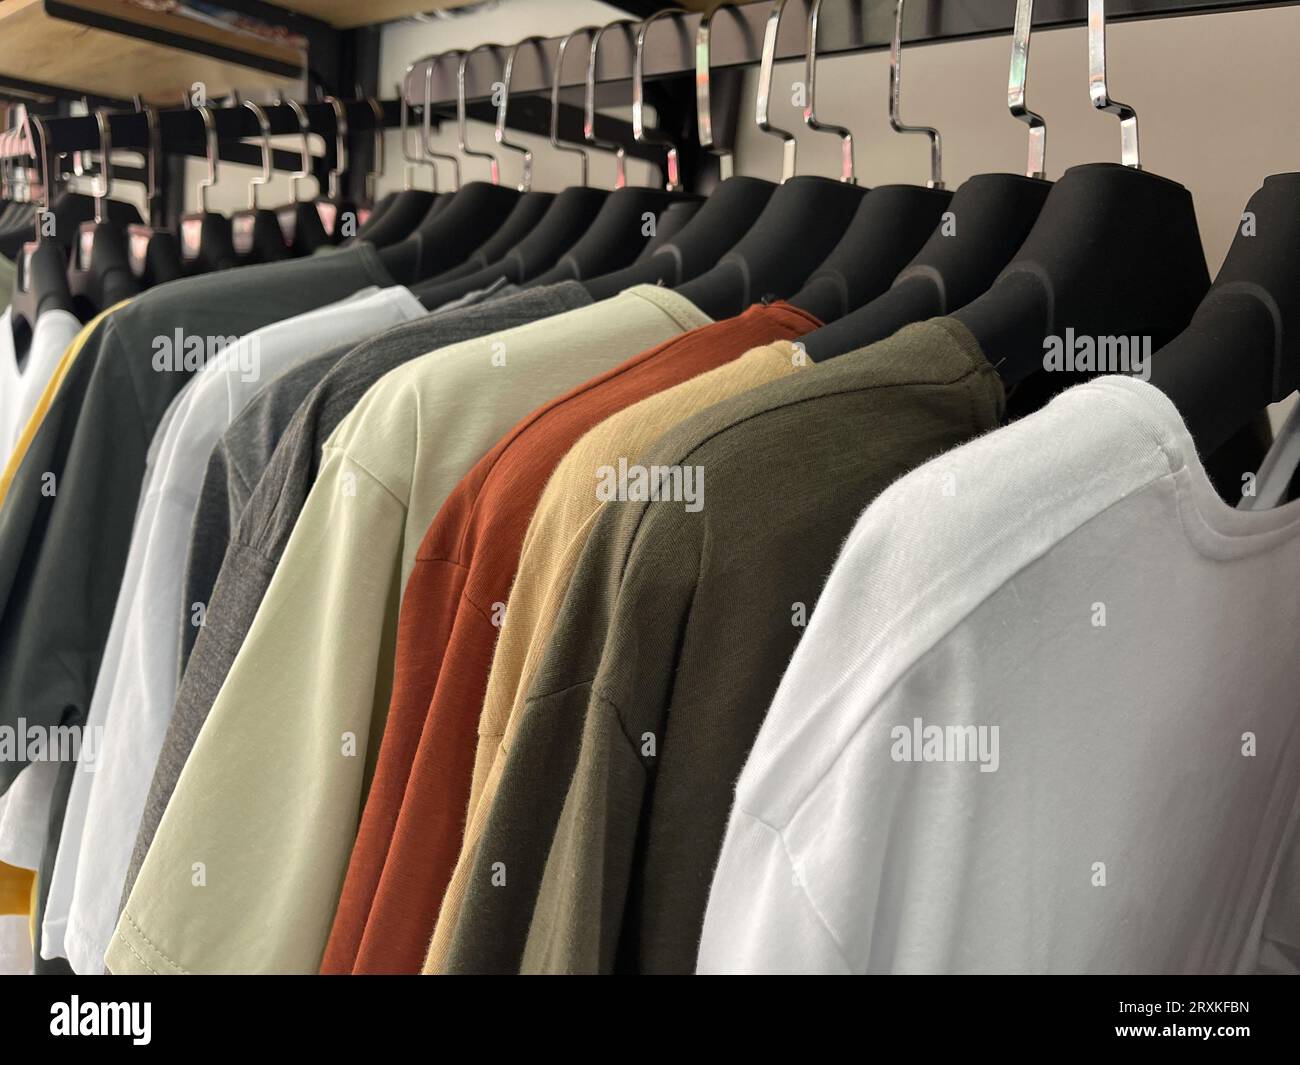 T-shirt hanging on hangers in the clothing store Stock Photo